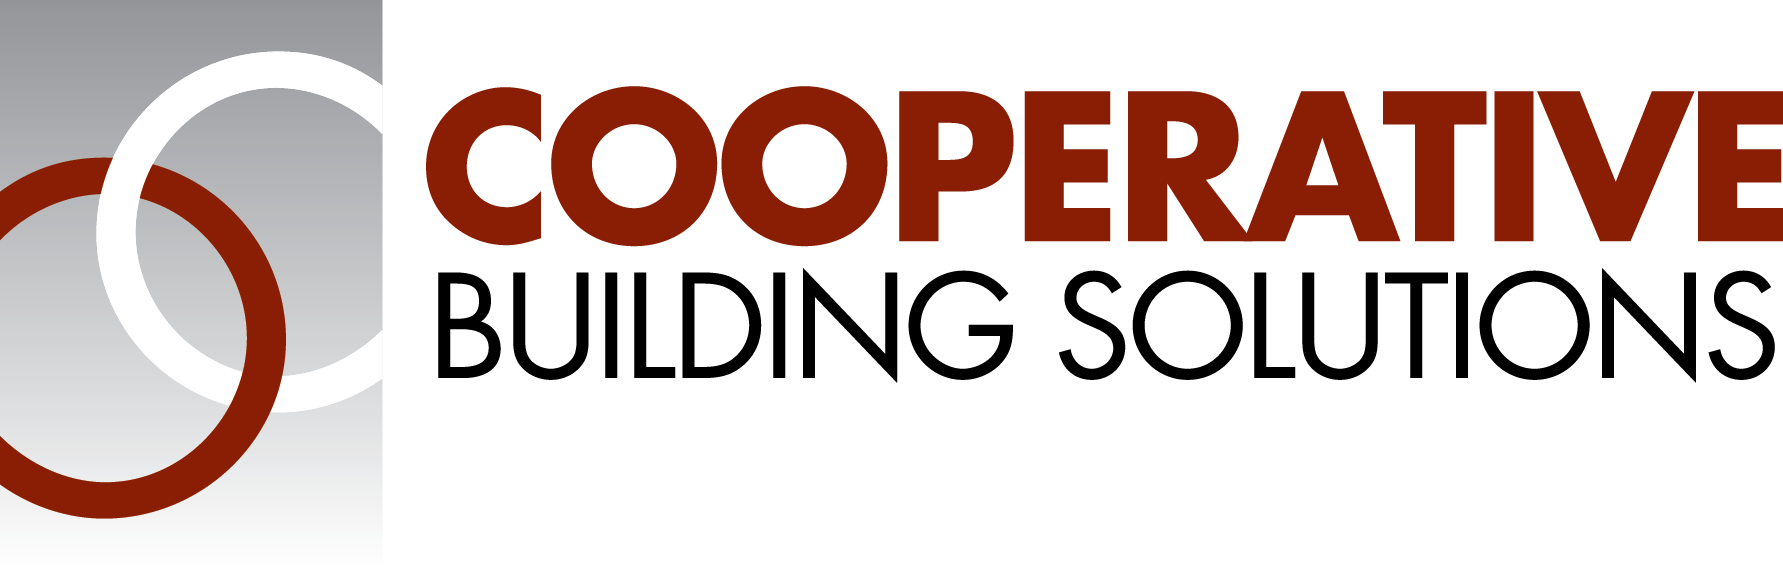 Cooperative Building Solutions logo